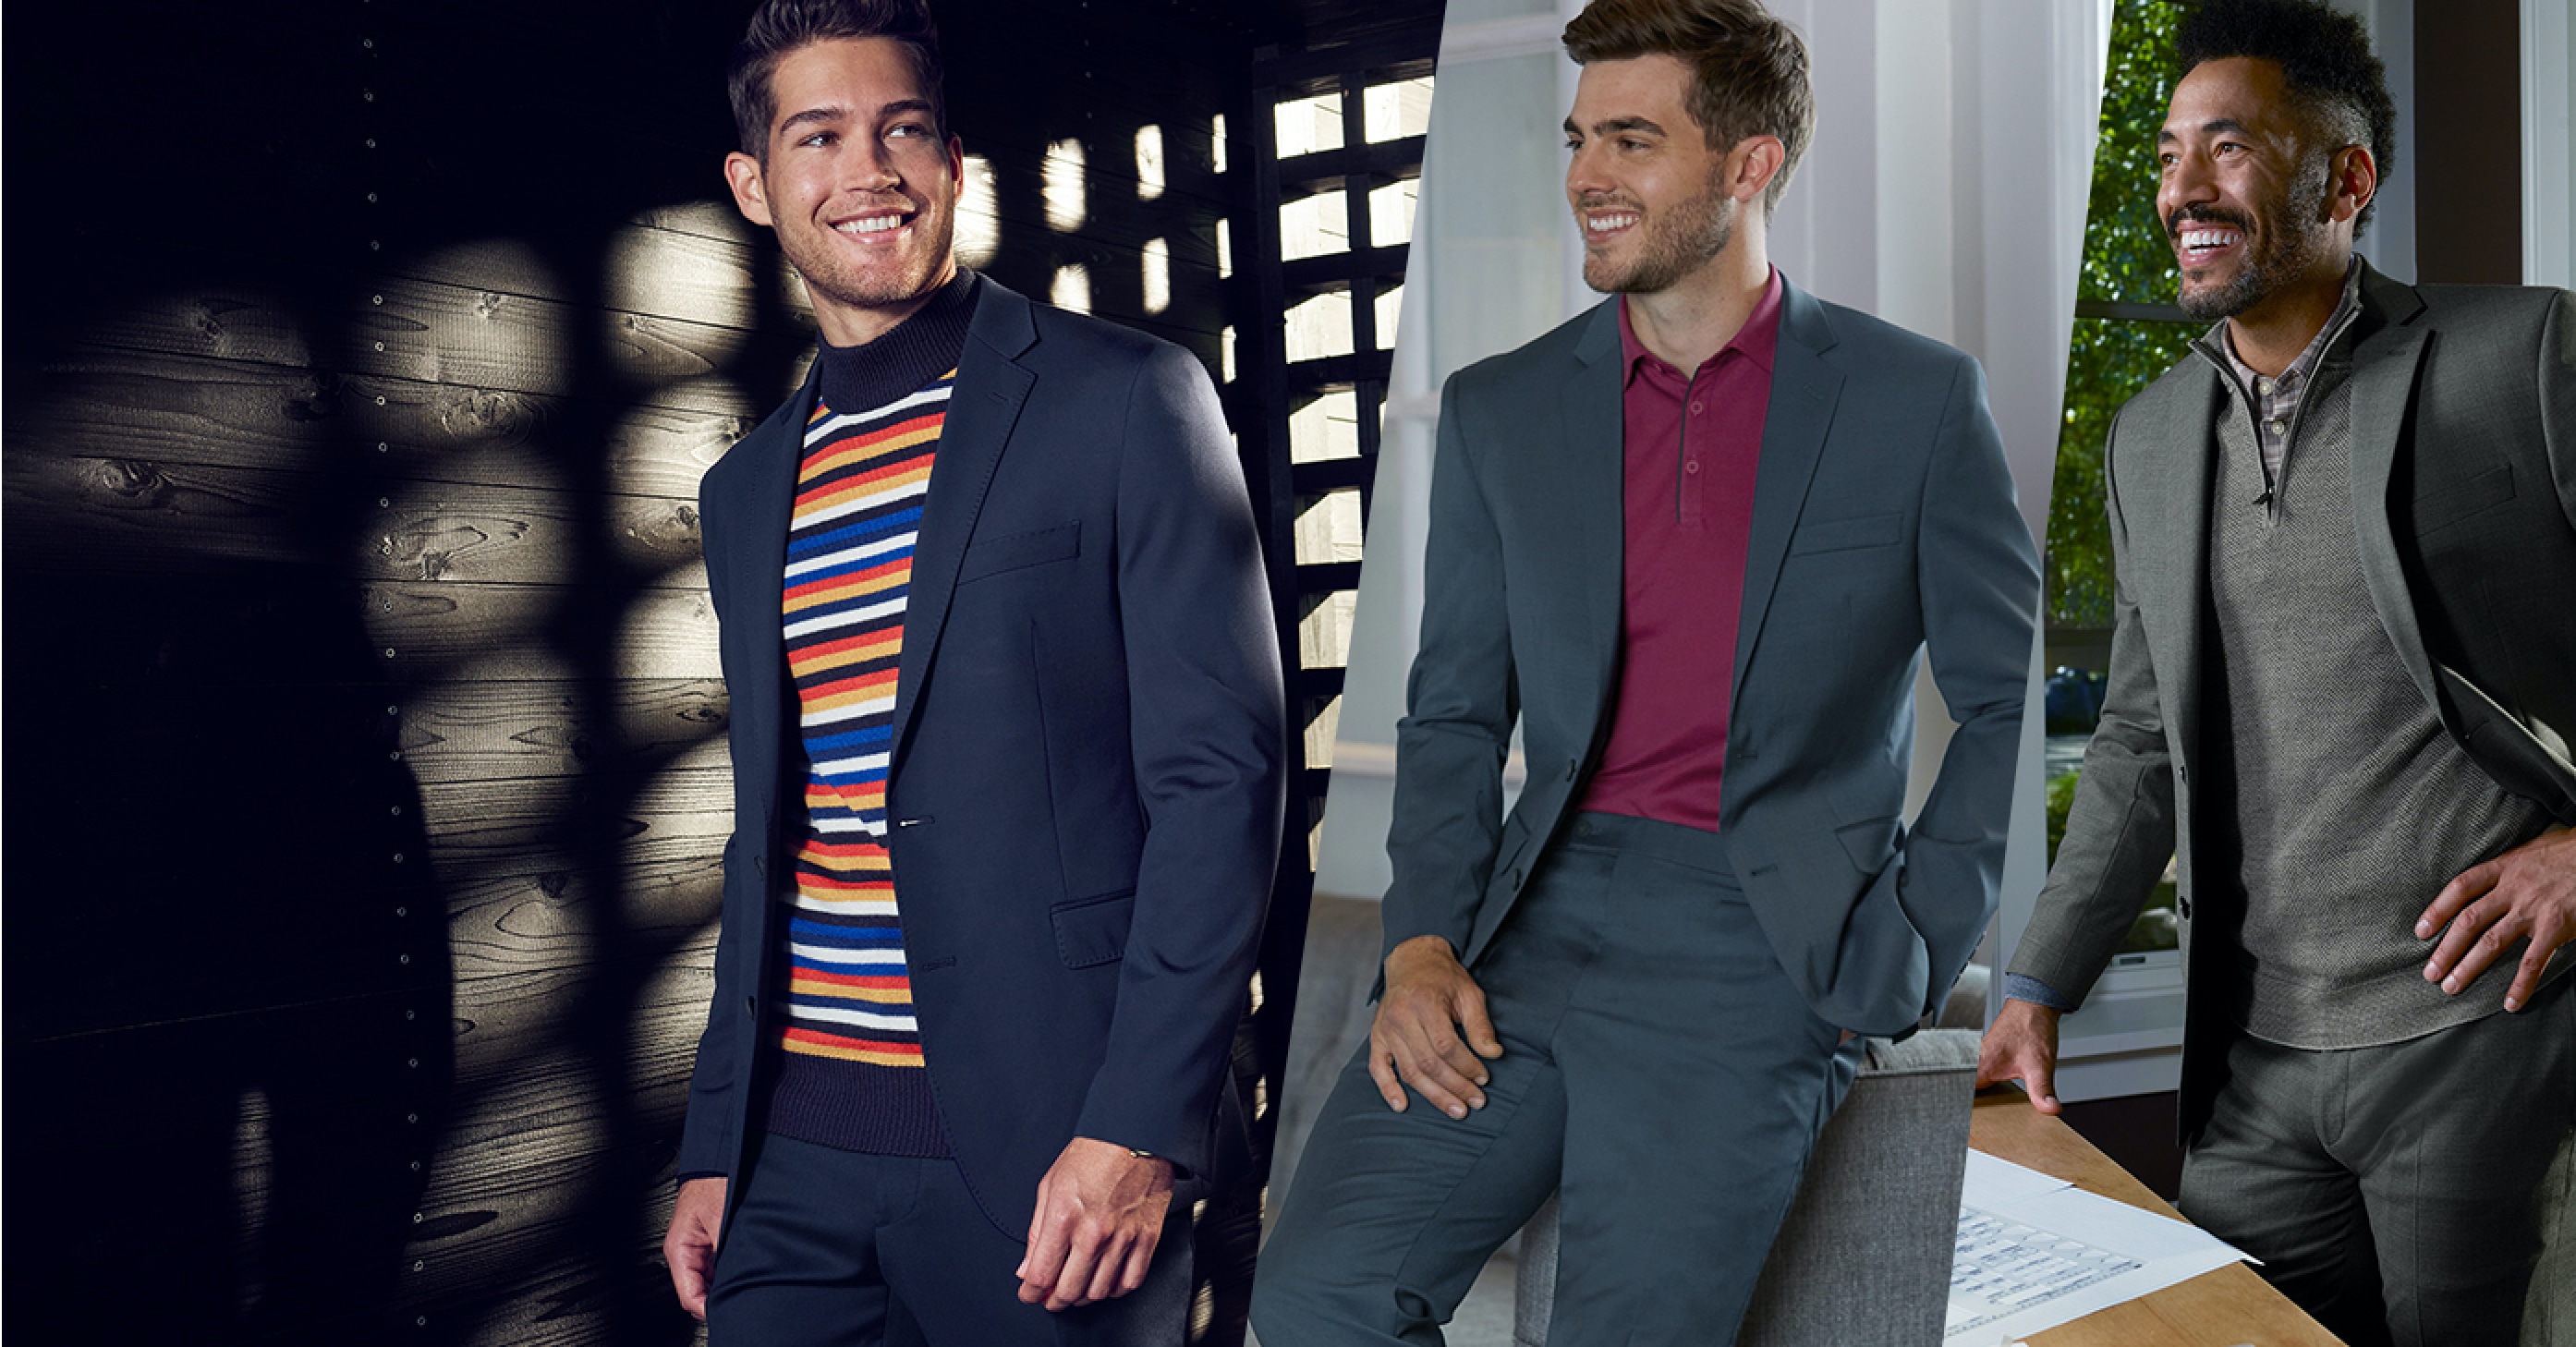 pendul Match session Shop Men's Clothing | Up To 80% Off | Men's Wearhouse